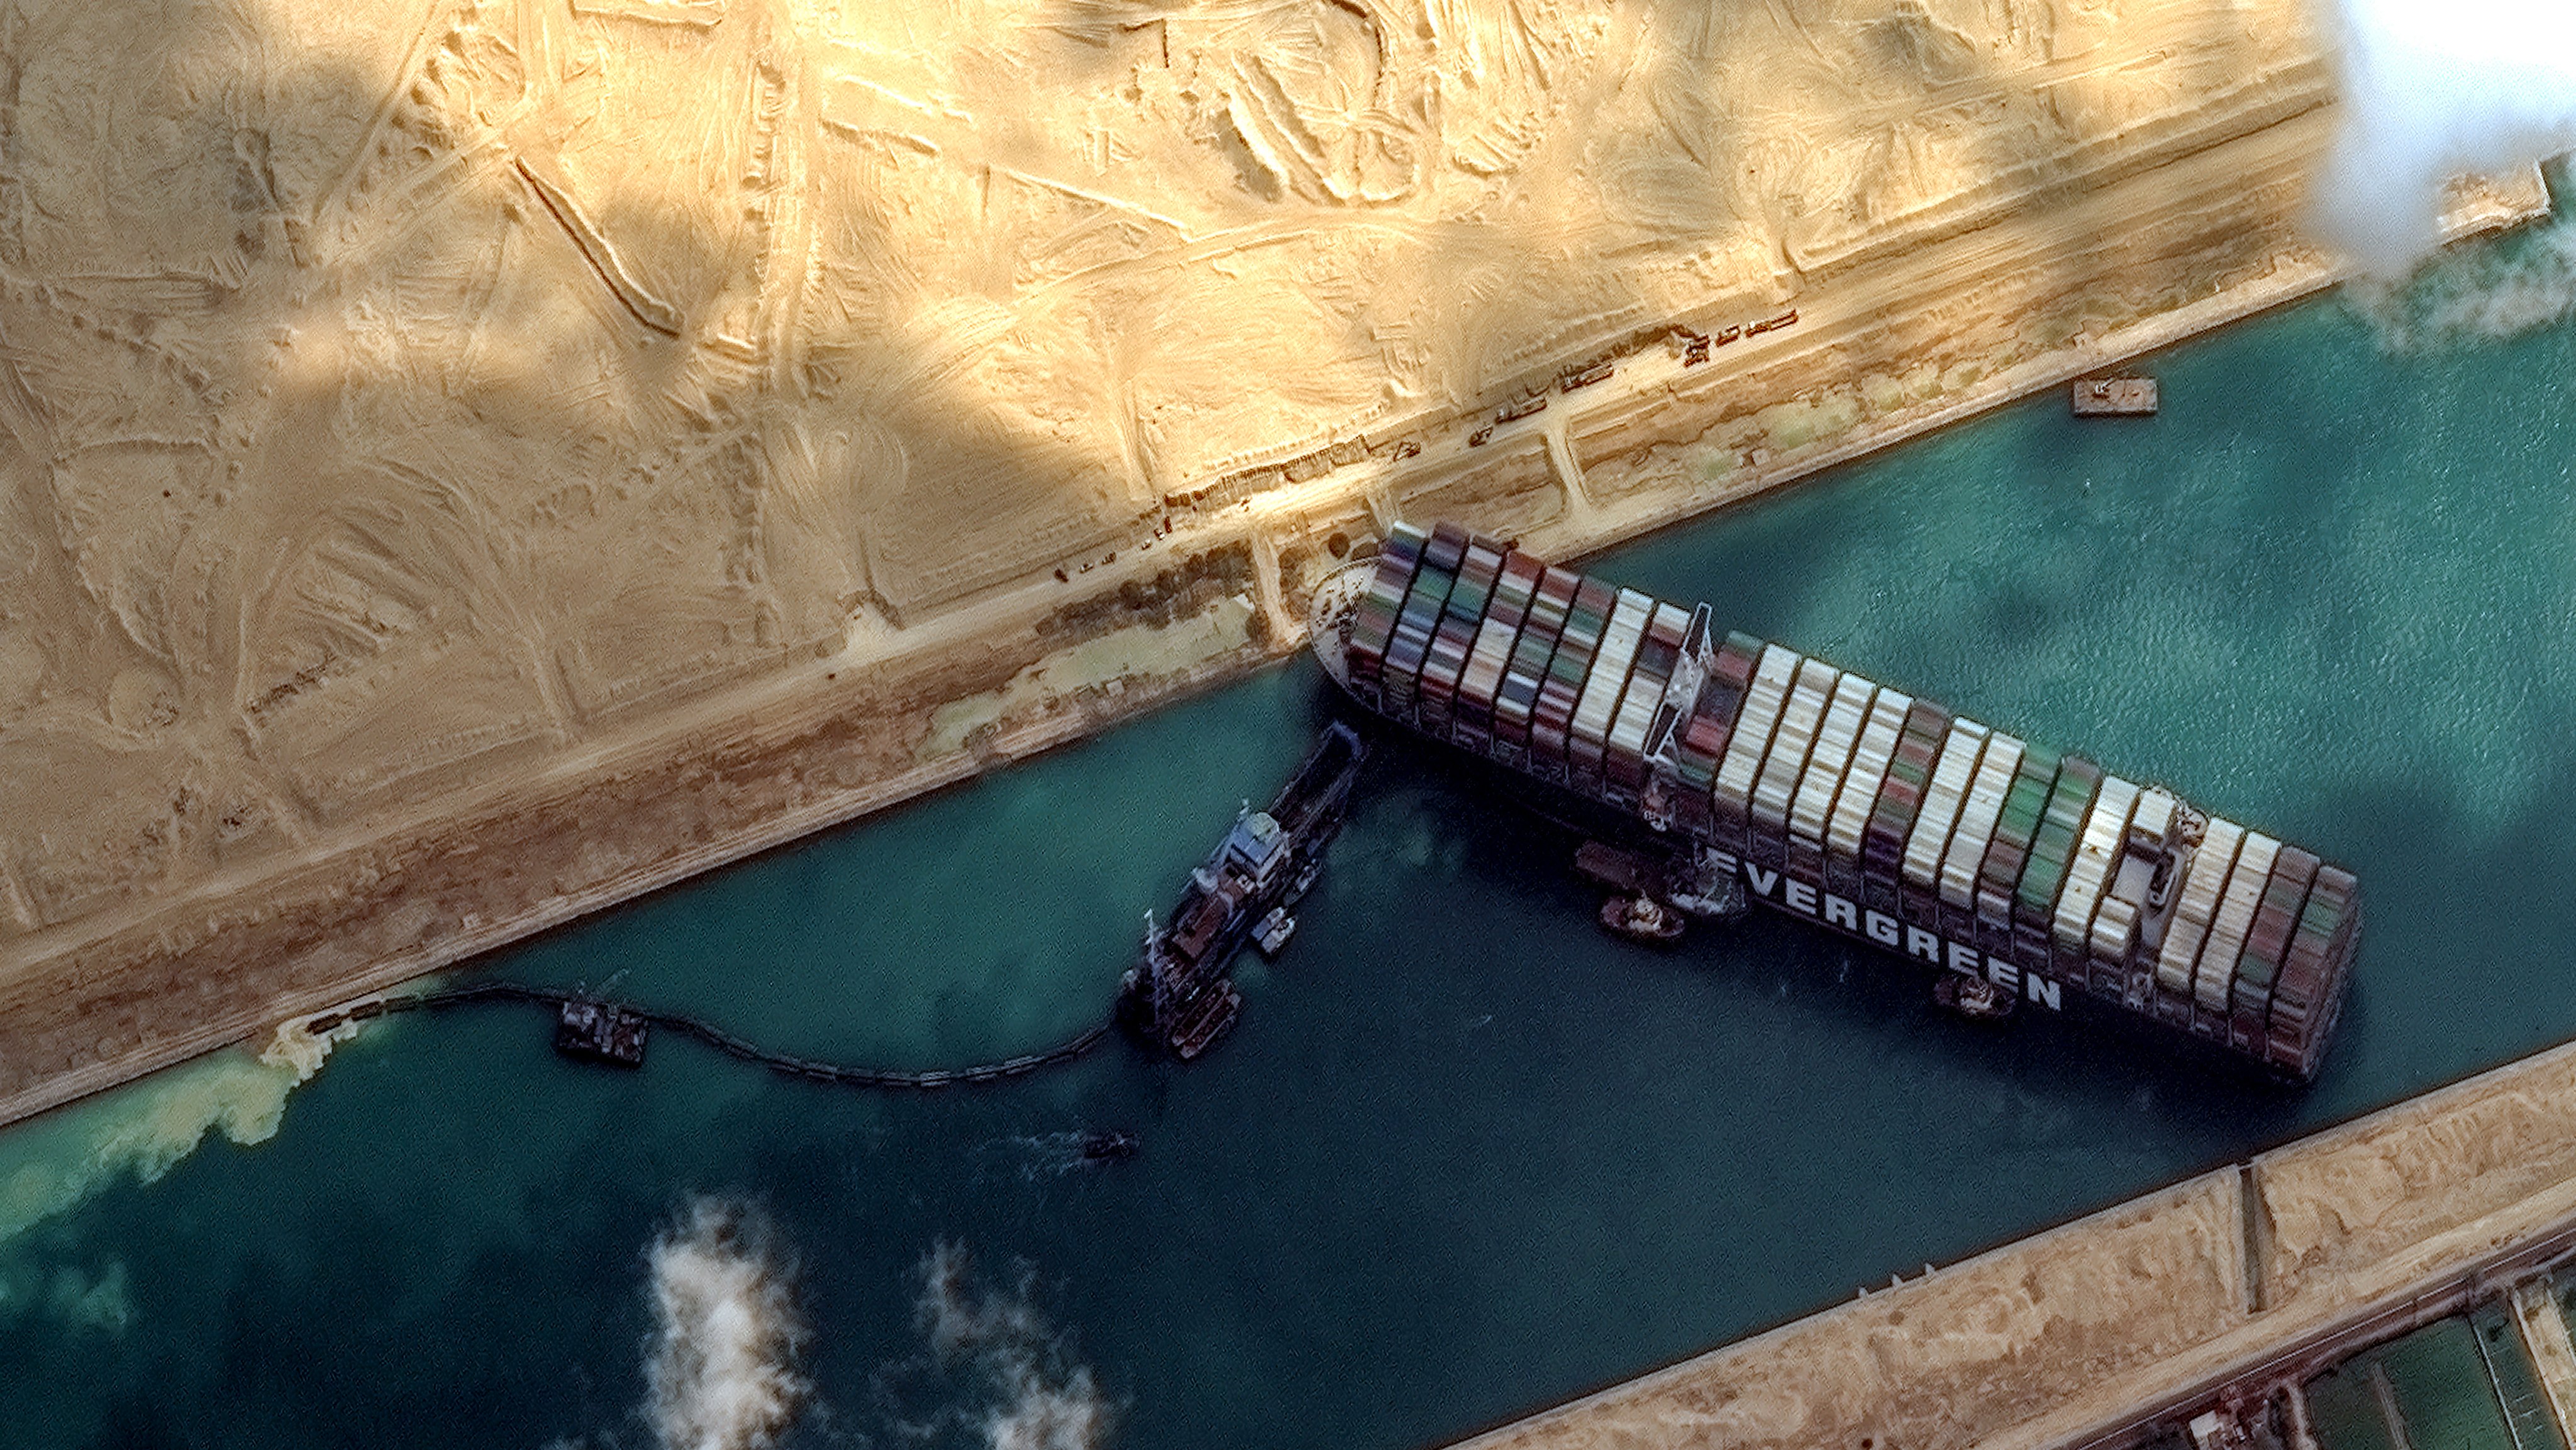 STUCK SHIP EVER GIVEN, SUEZ CANAL -- MARCH 26, 2021:  Maxars WorldView-2 collected new high-resolution satellite imagery of the Suez canal and the container ship (EVER GIVEN) that remains stuck in the canal north of the city of Suez, Egypt.